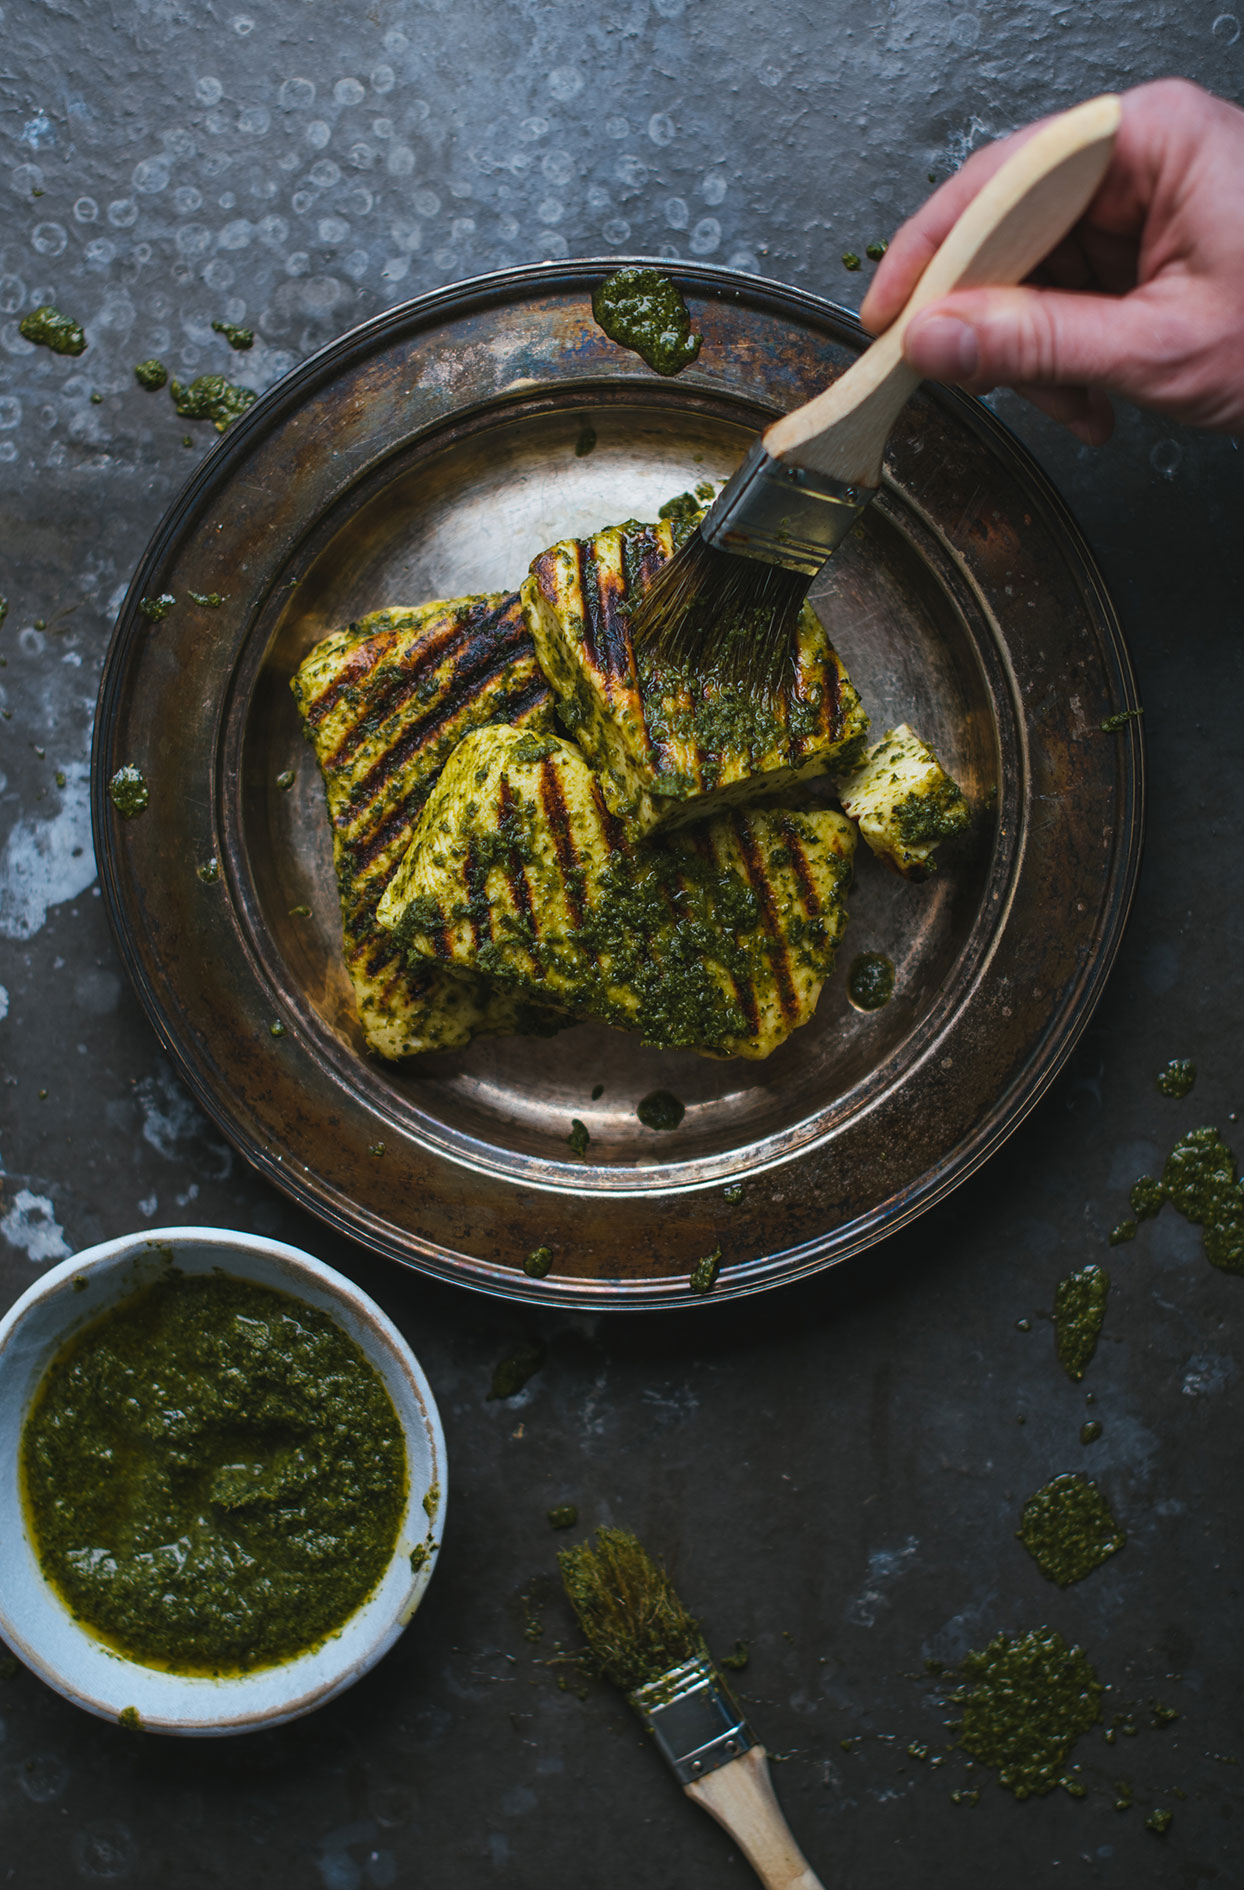 Grilled haloumi cheese with pesto